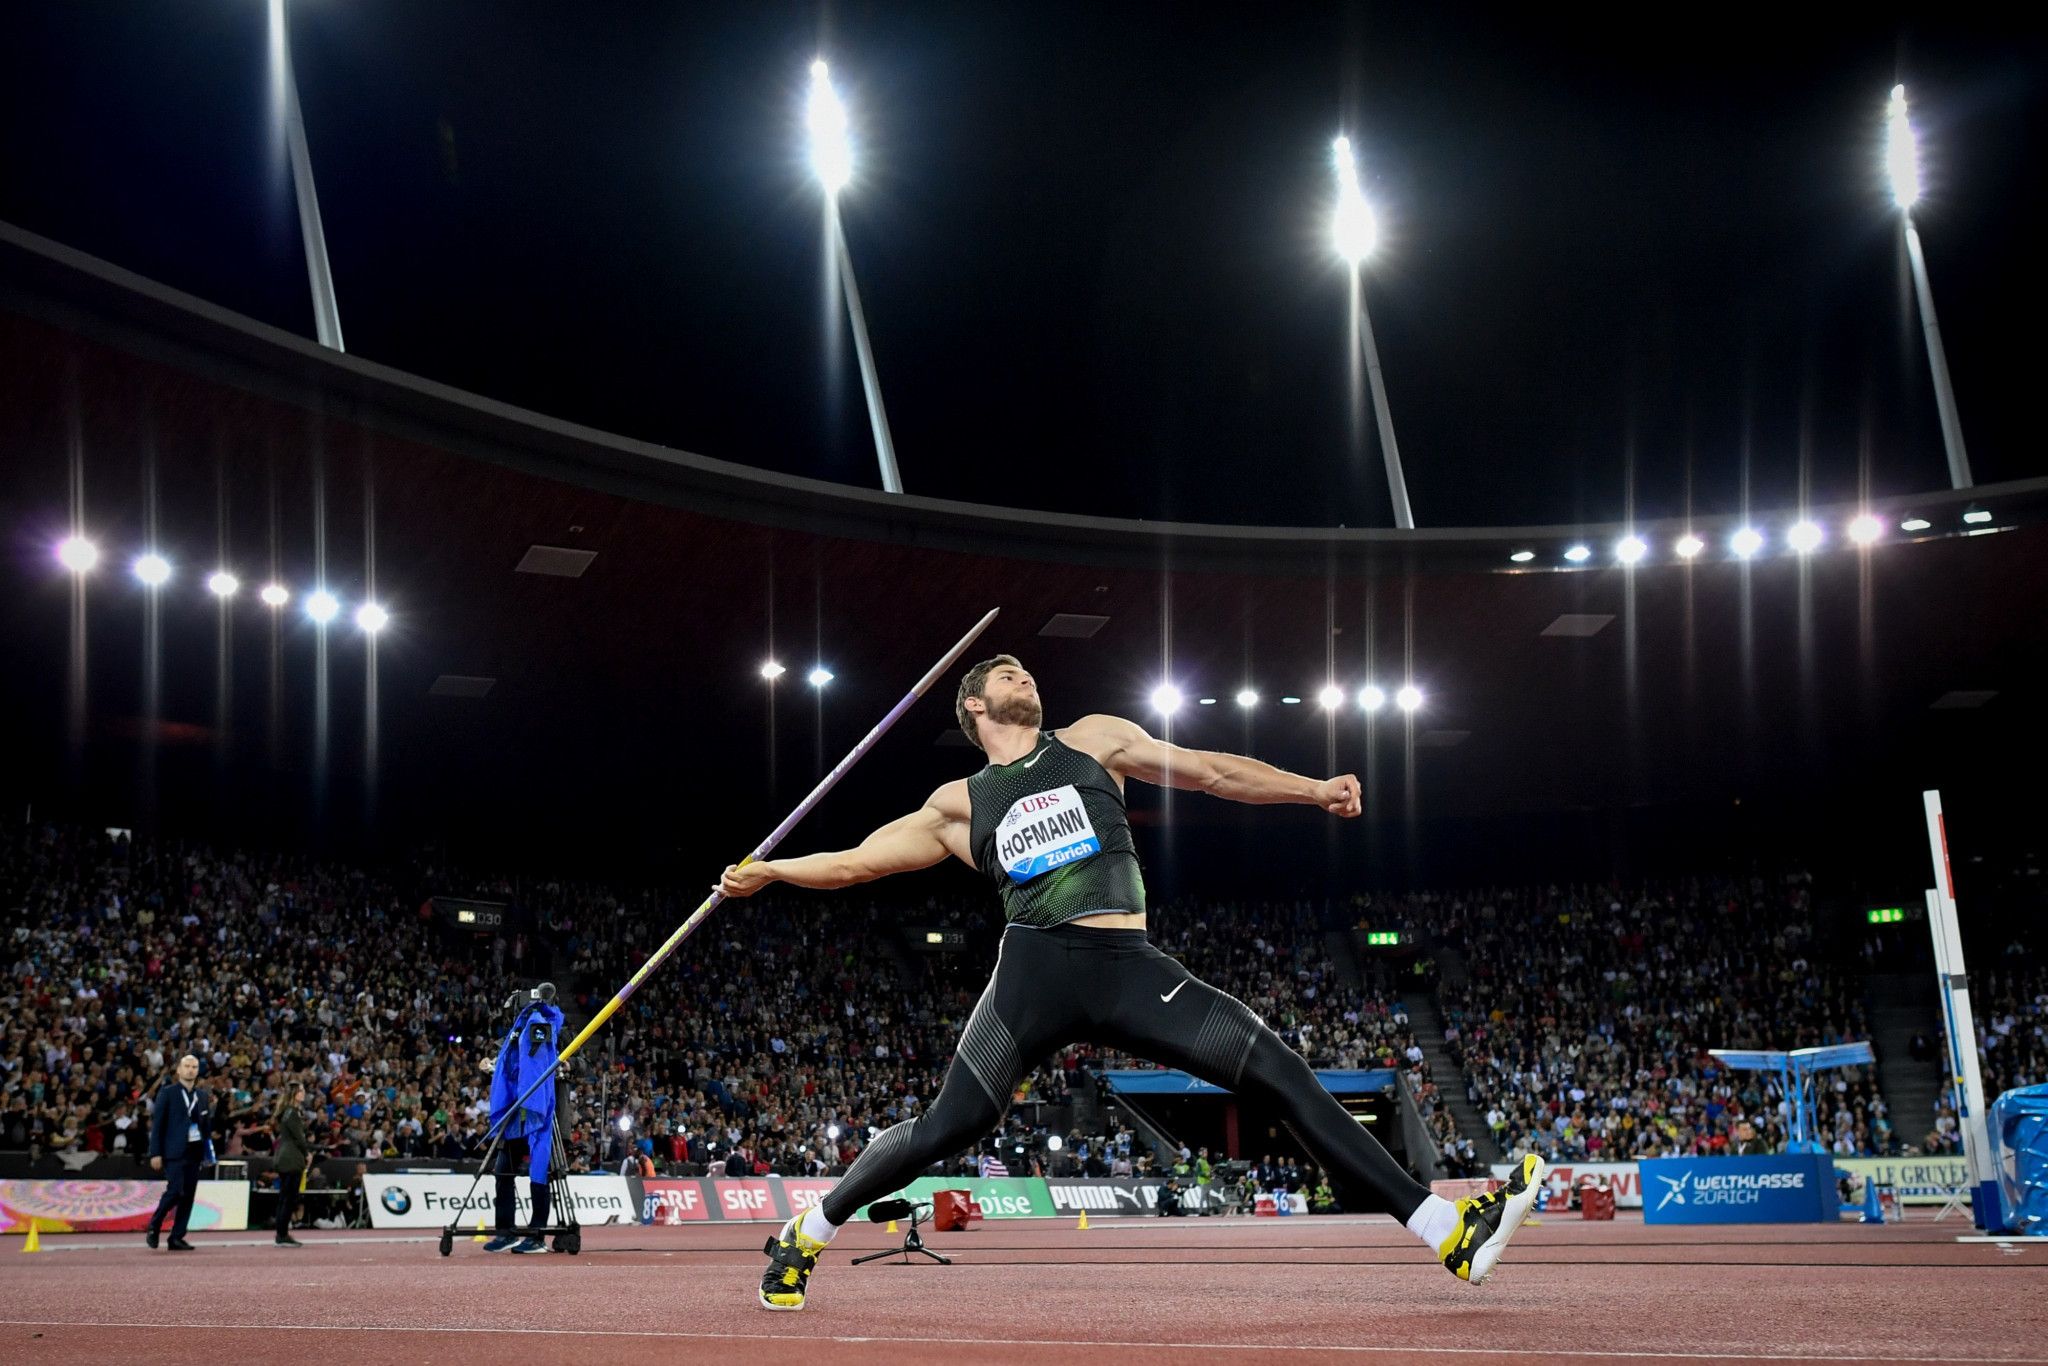 Weltklasse Zurich will host the International Association of Athletics Federations Diamond League Final in 2020 and 2021 ©Getty Images